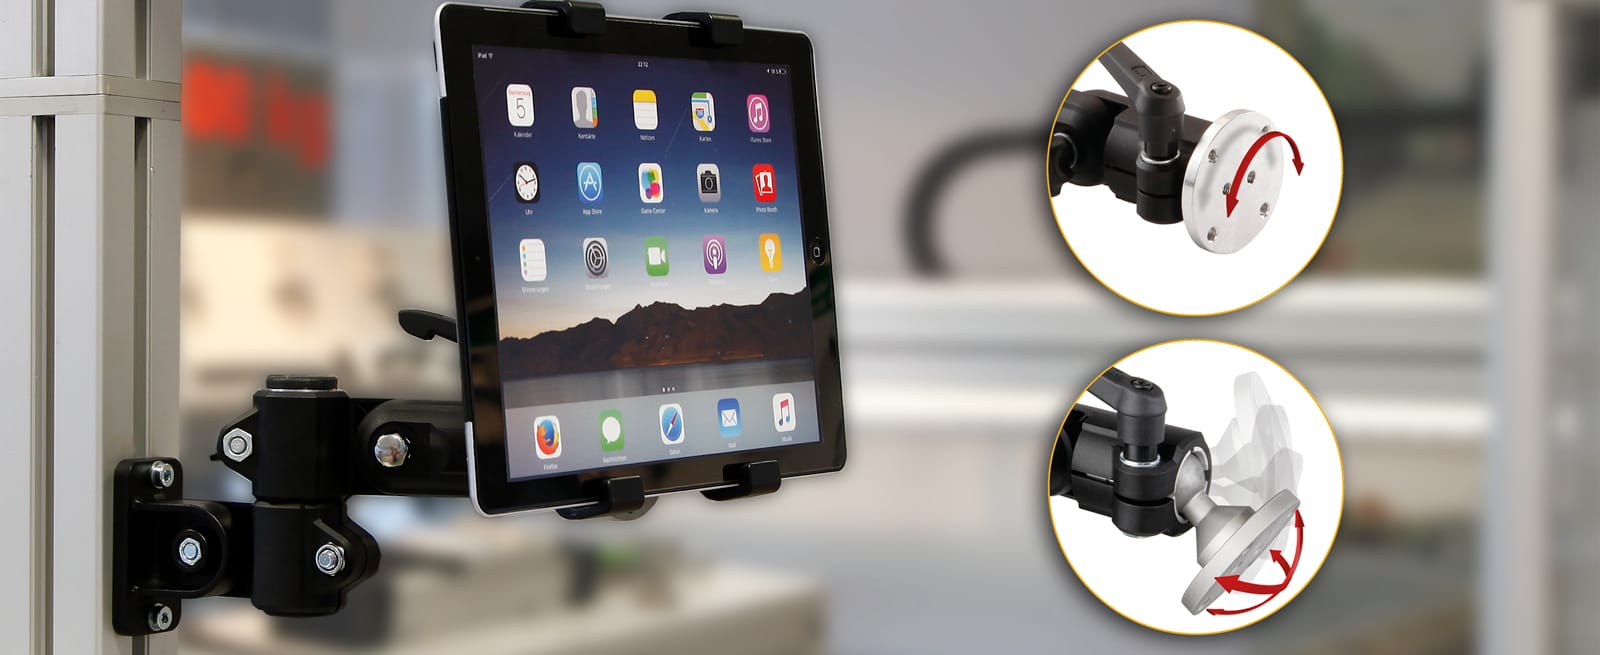 The tablet holder can be mounted directly on the fastening flange of the RK monitor mounting